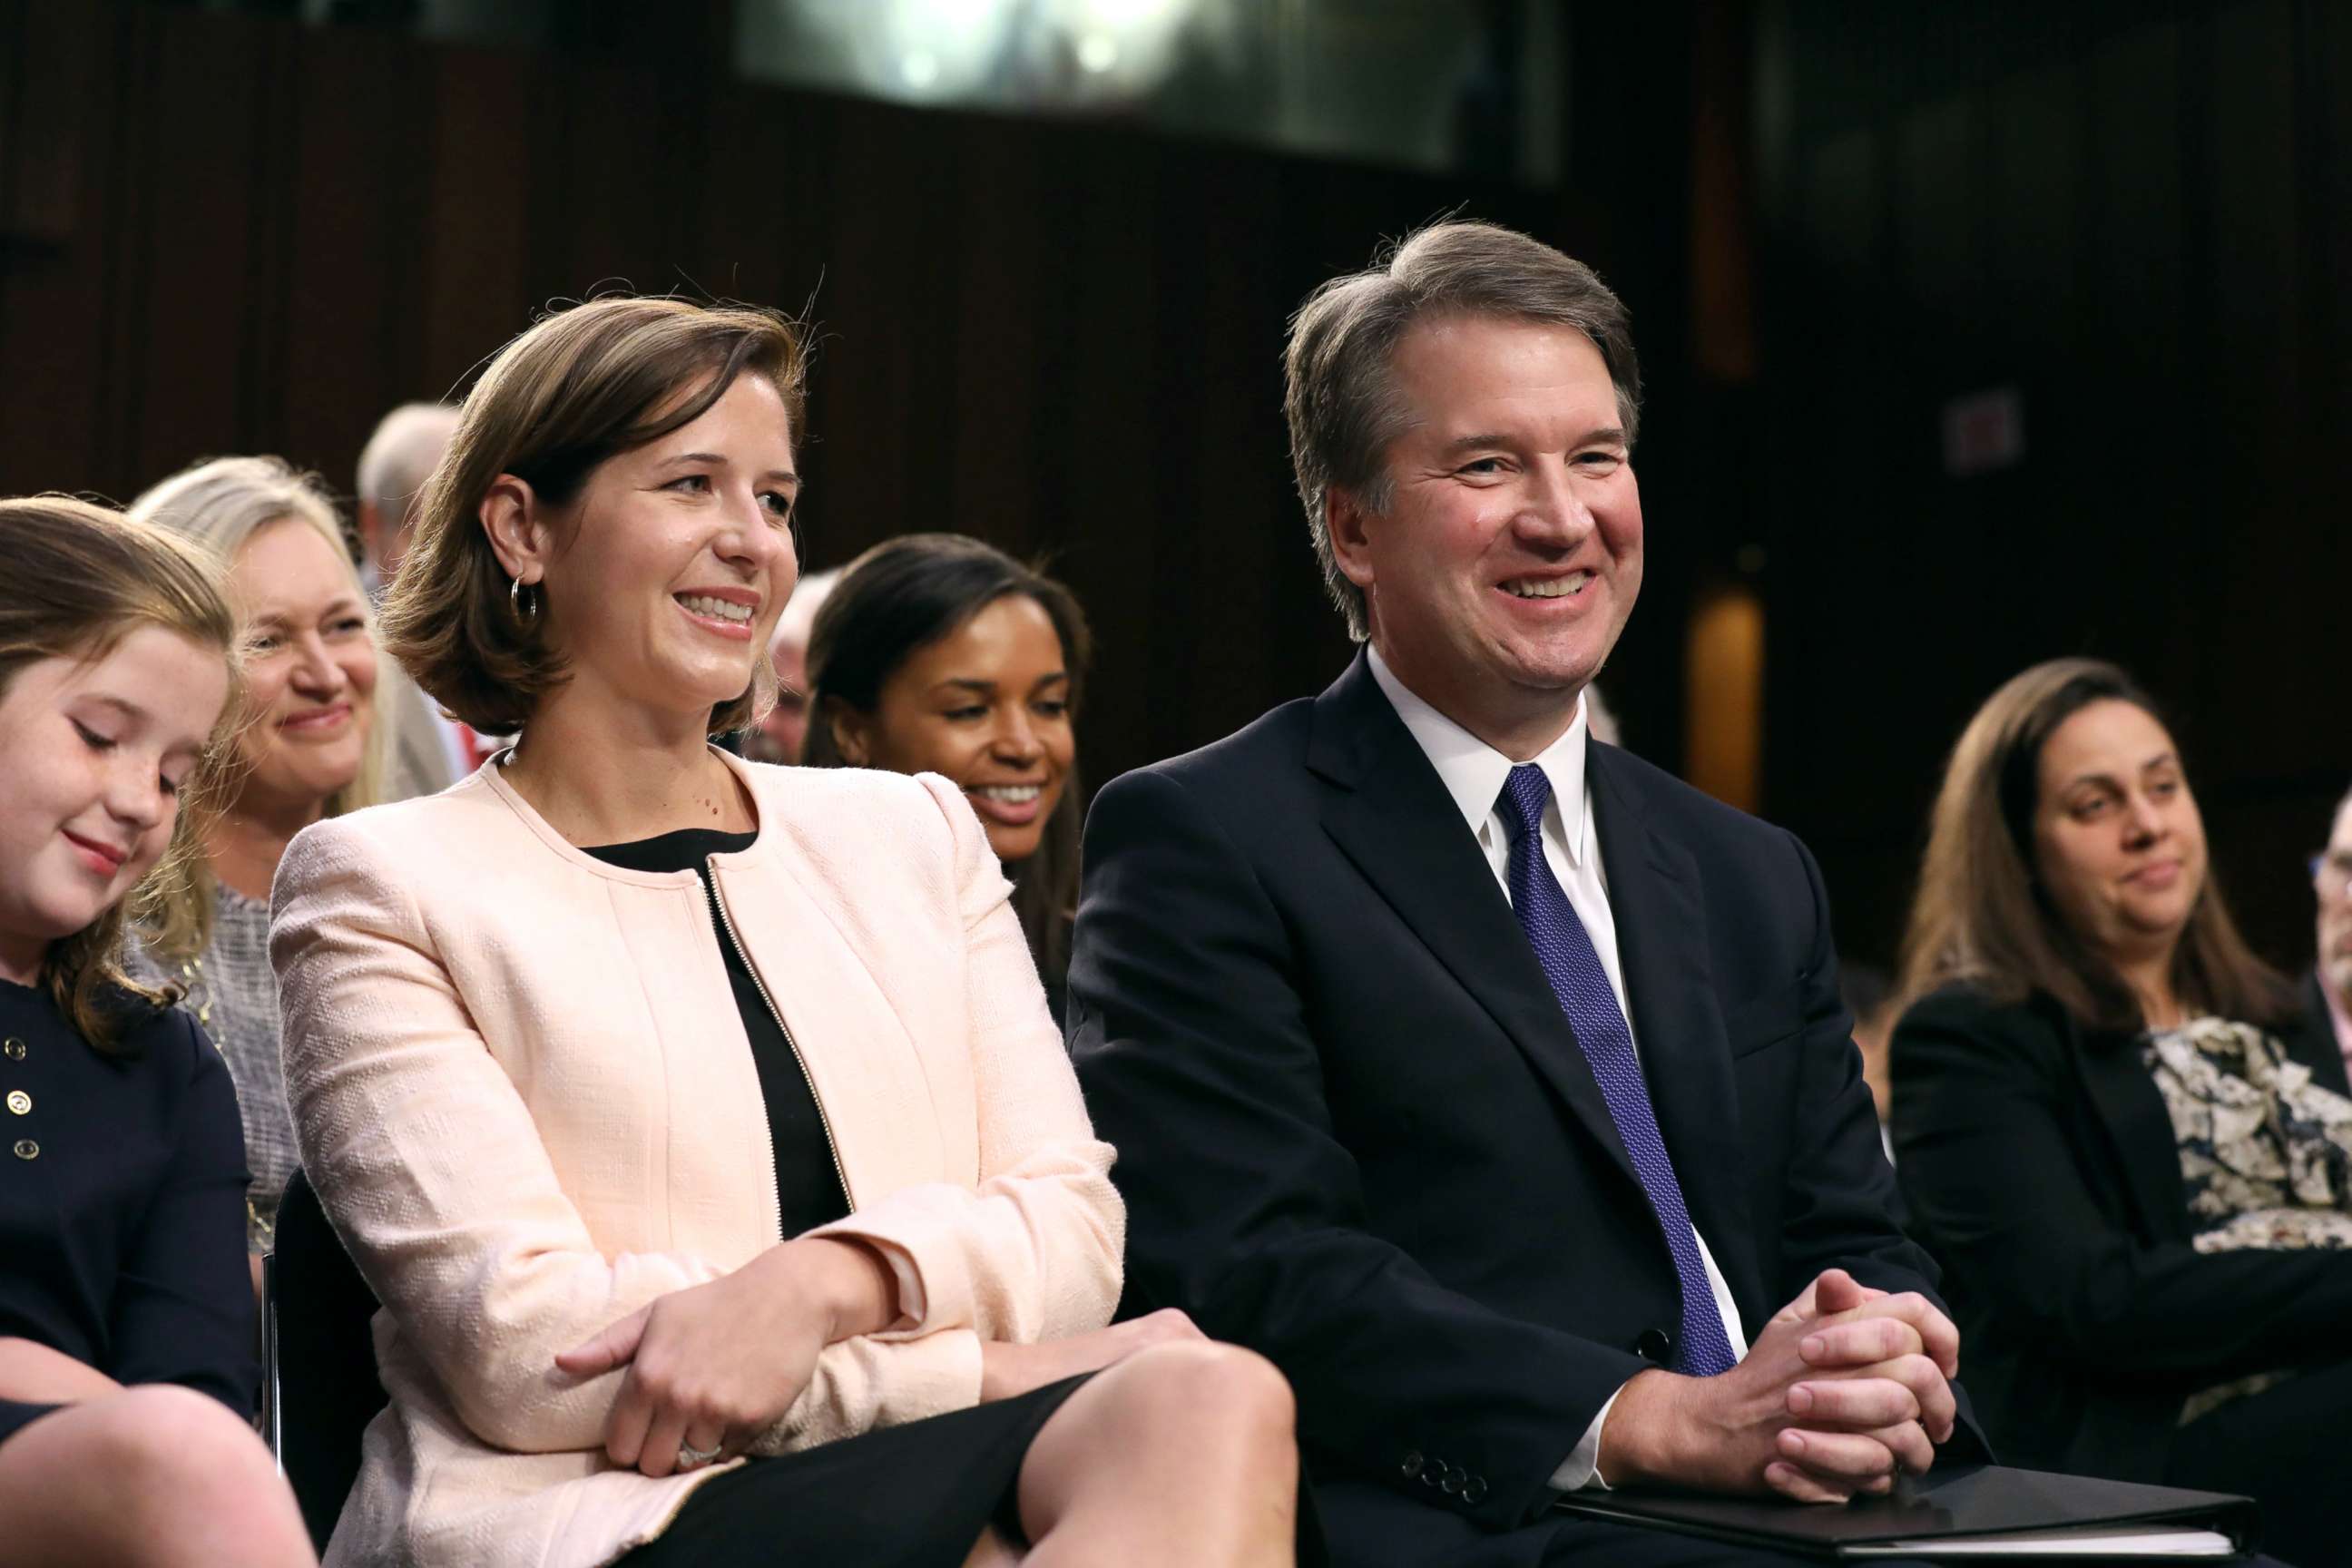 PHOTO: Supreme Court nominee judge Brett Kavanaugh sits with his wife Ashley Estes Kavanaugh as they listen to his introductions at his Senate Judiciary Committee confirmation hearing on Capitol Hill in Washington, Sept. 4, 2018.